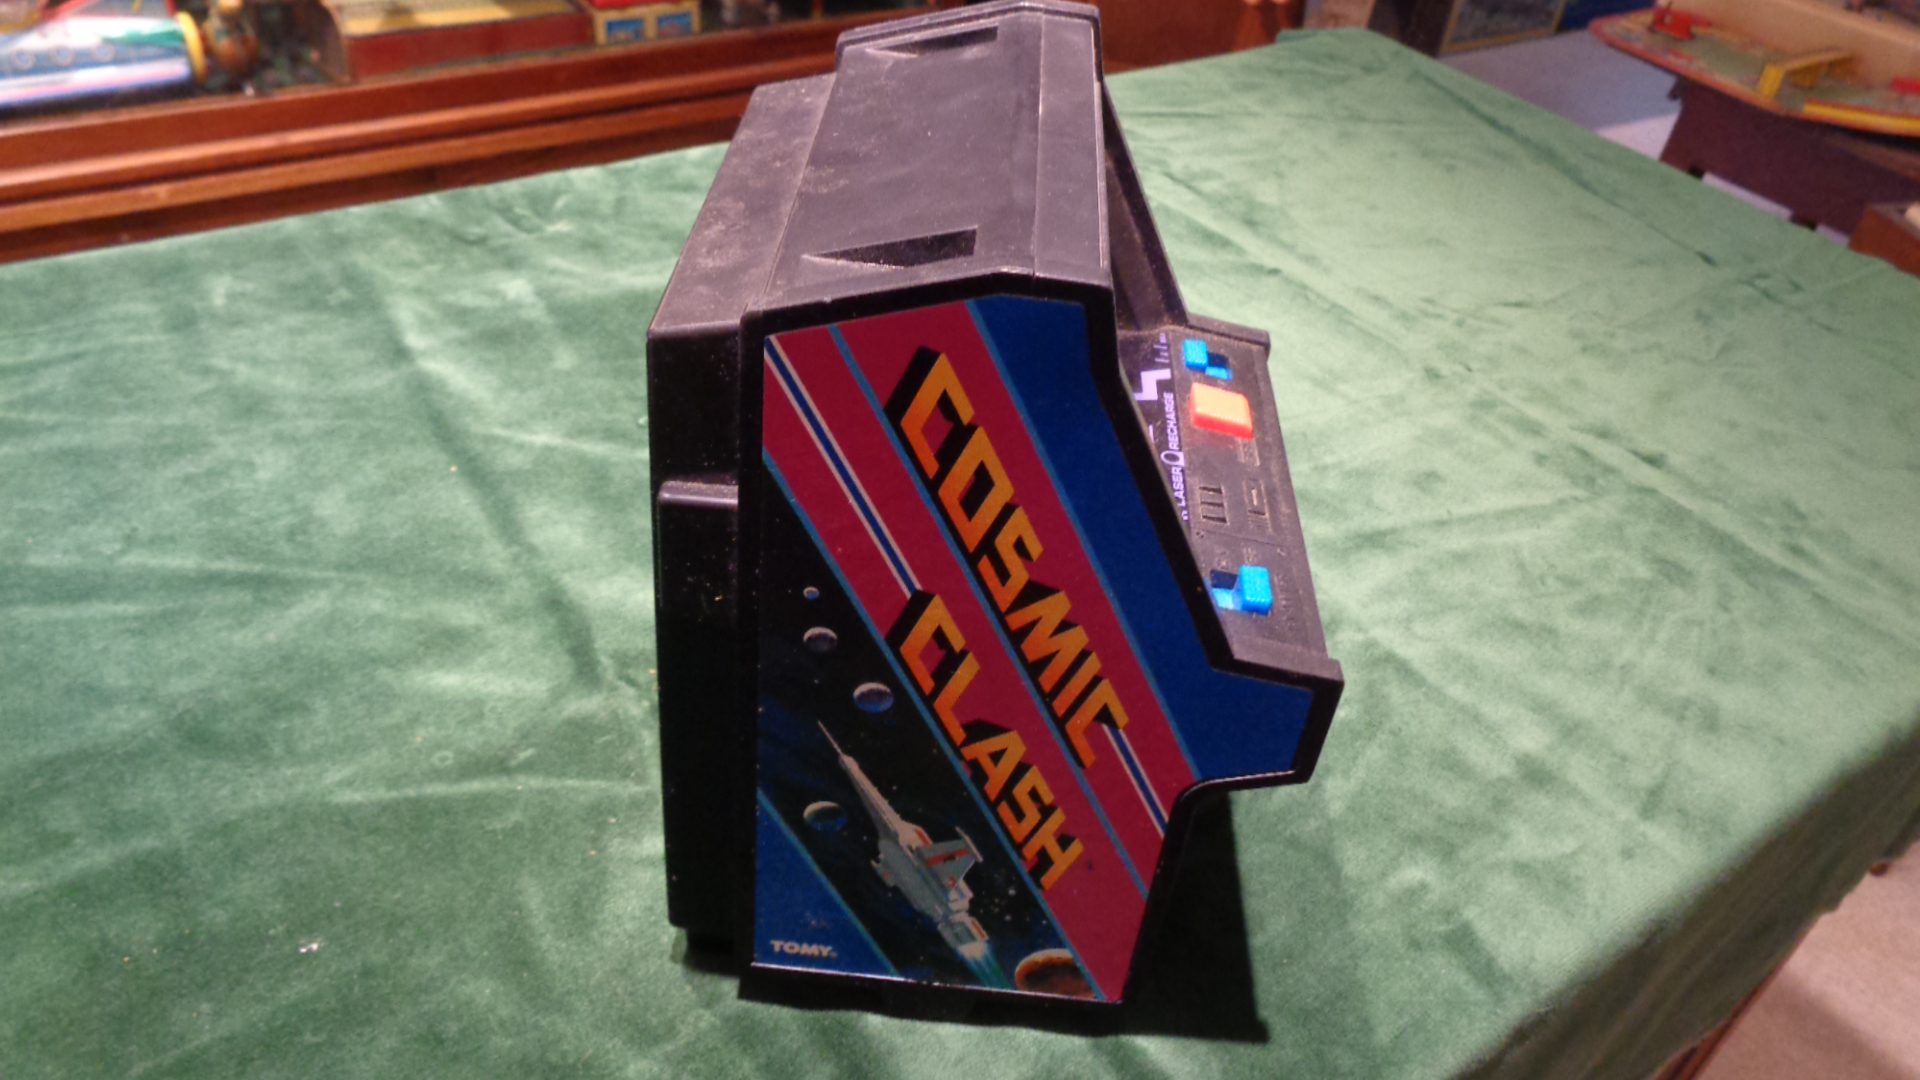 Video Game Cosmic Clash, with Box, Left View